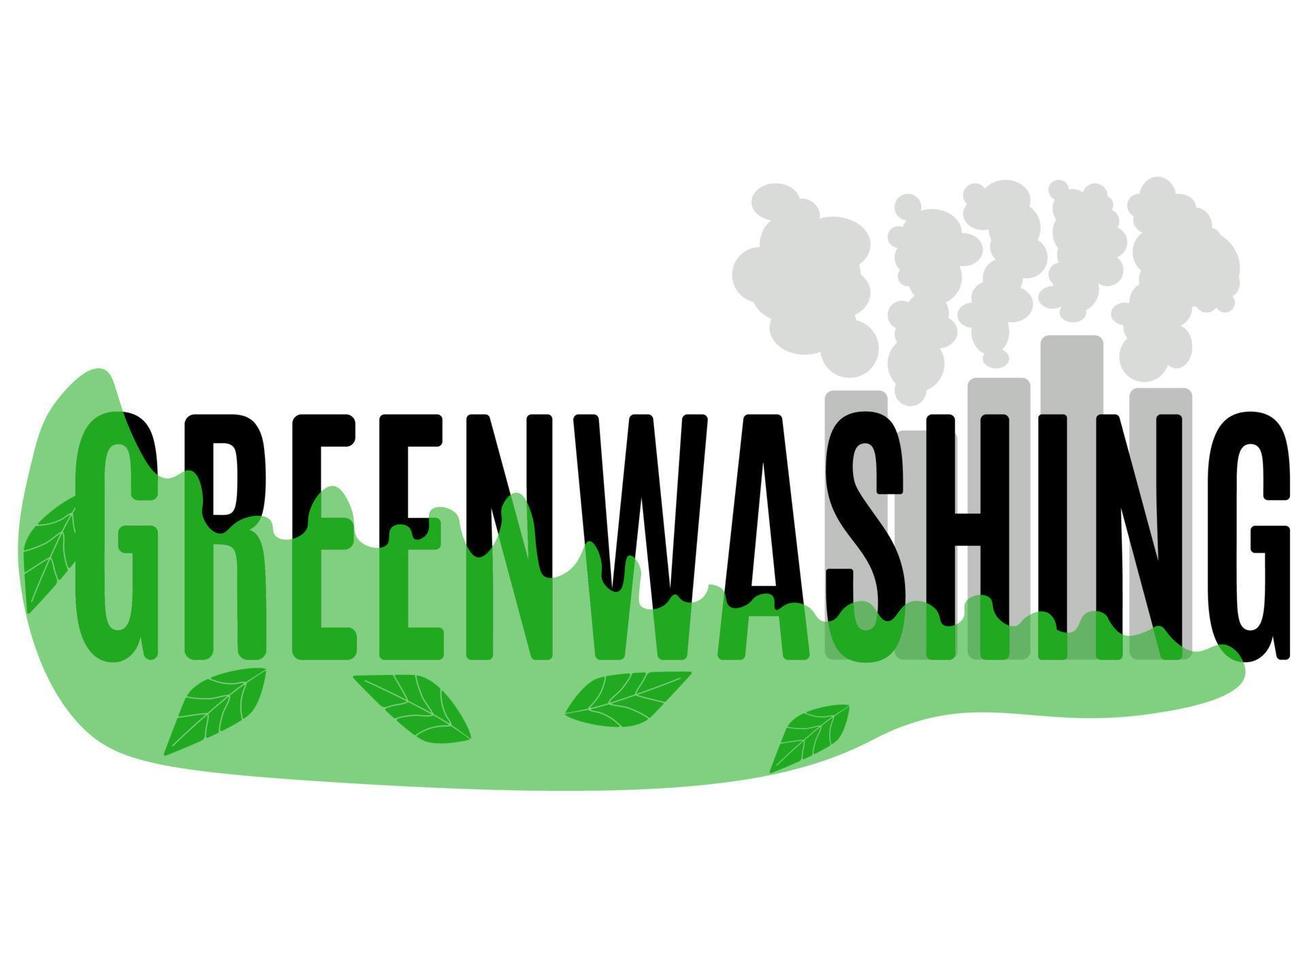 Greenwashing banner, information materials, cover for non-sustainable production vector